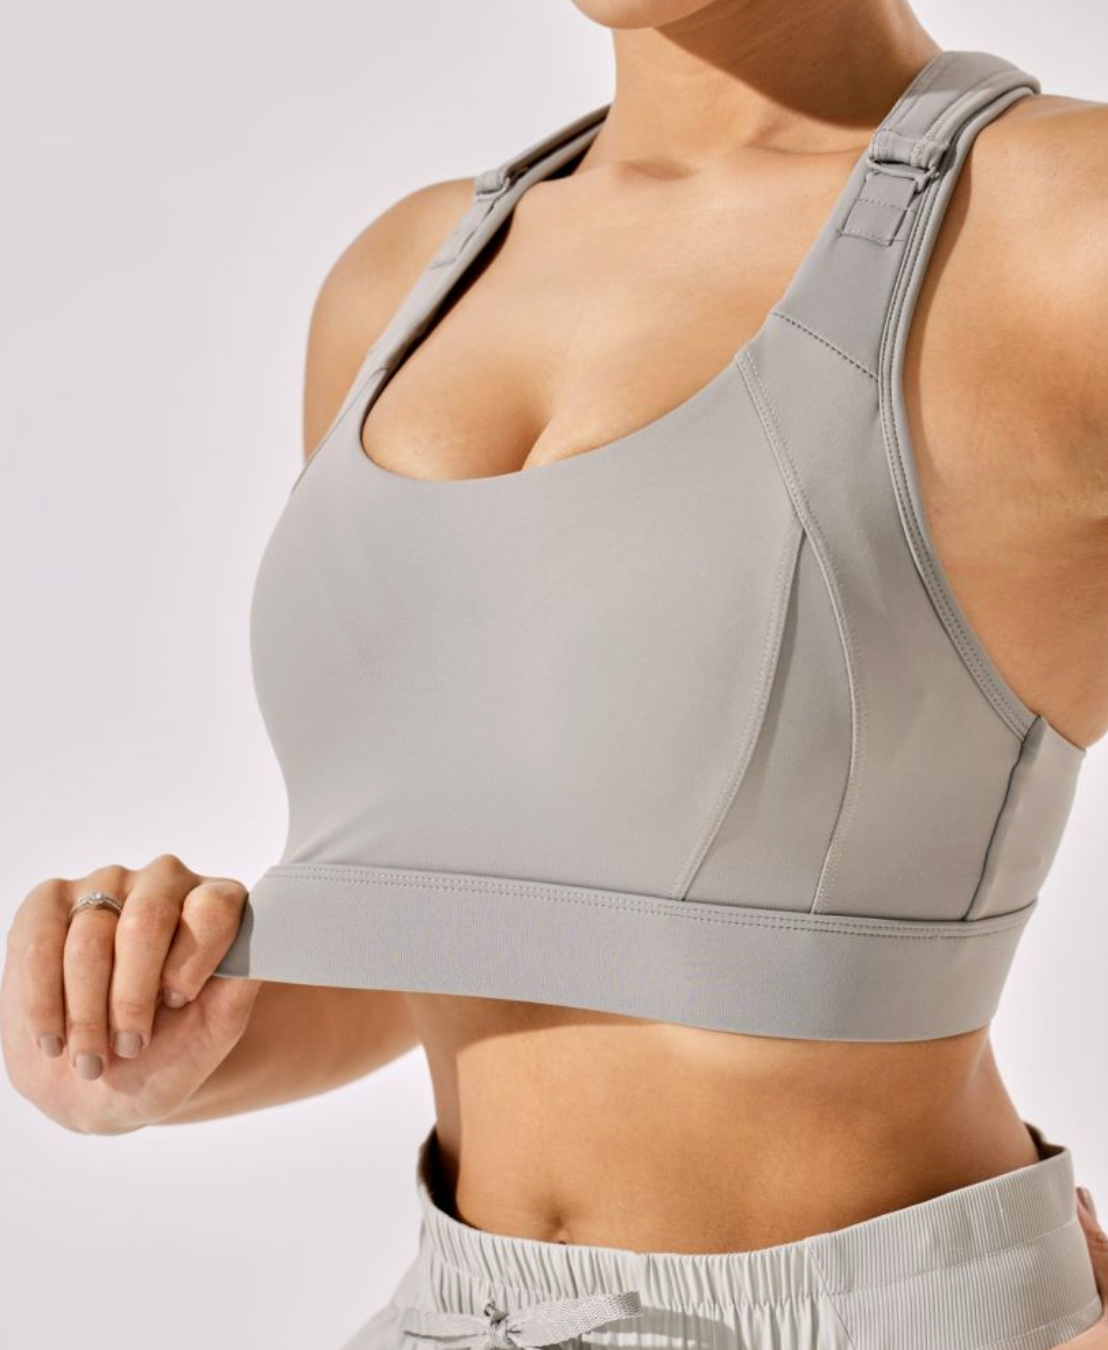 Buy 1, Get 1 Free - High Impact Adjustable Spirited Running Sports Bra With Moulded Cups & Clasp (Up to 5XL)